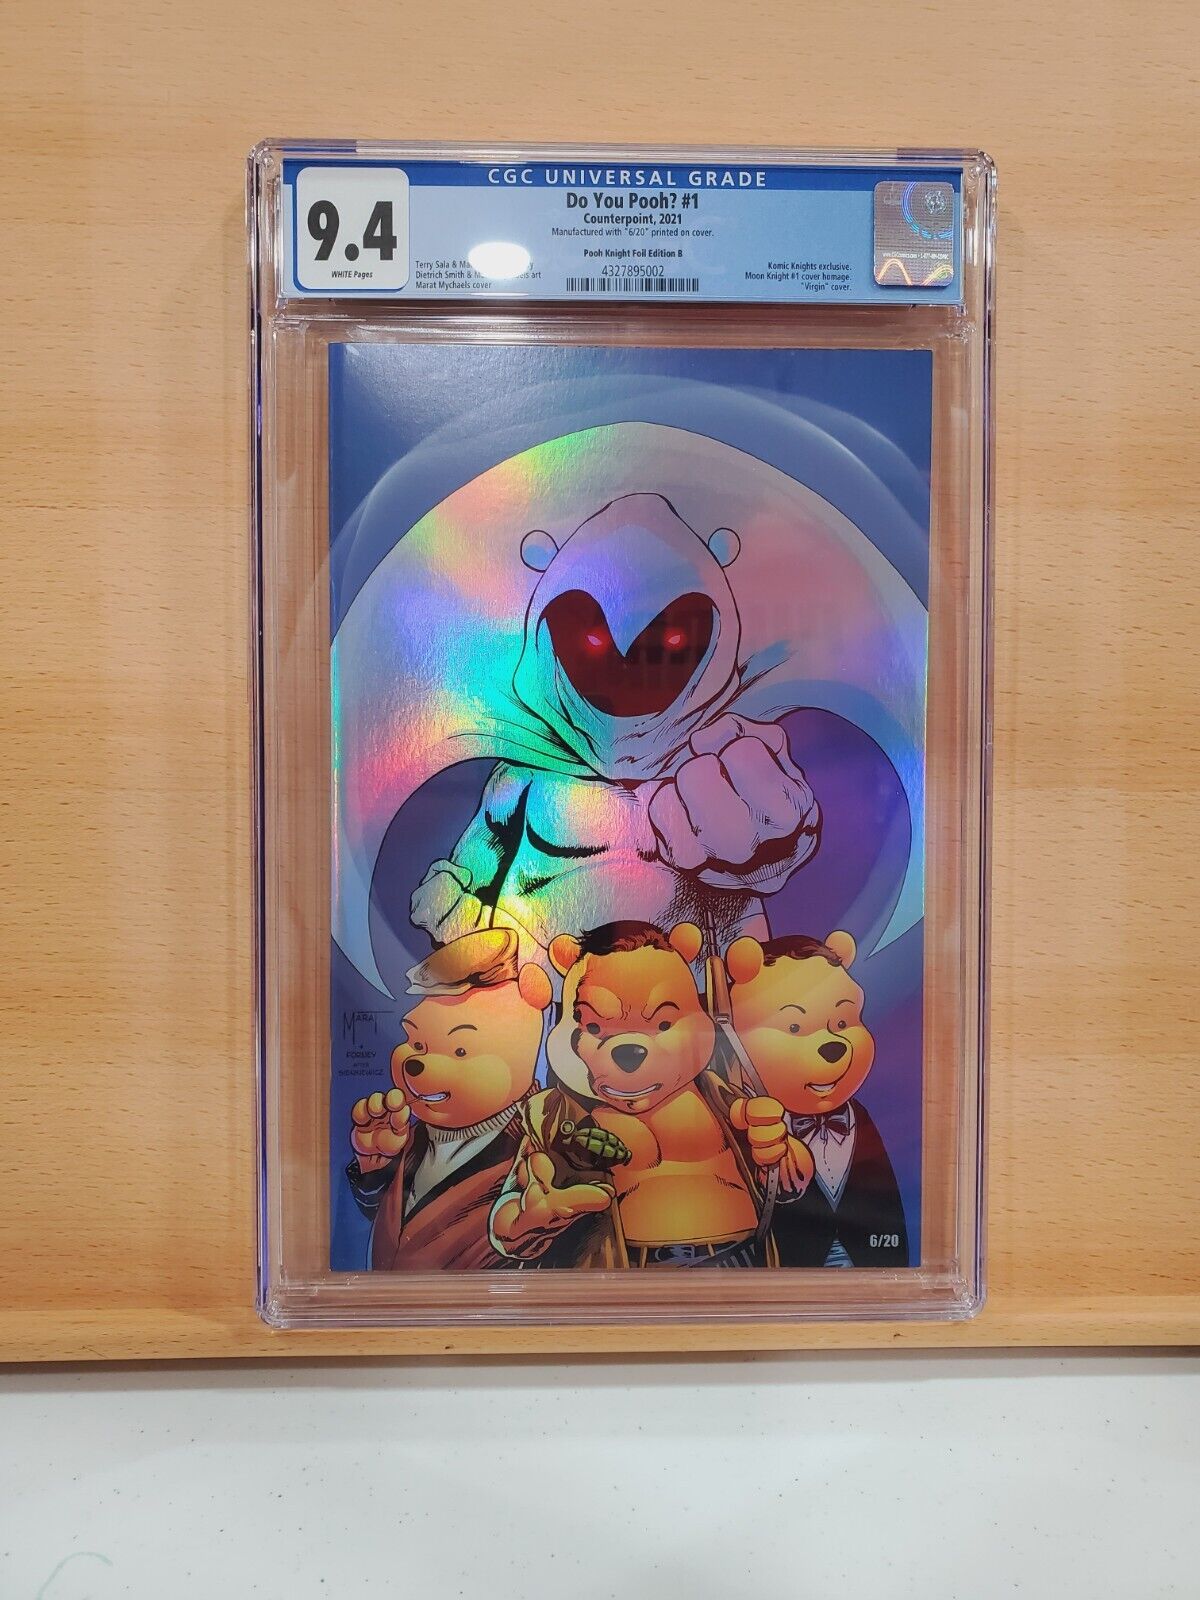 Counterpoint Do You Pooh #1 Moon Knight Pooh Knight Foil Variant 6/20 CGC 9.4